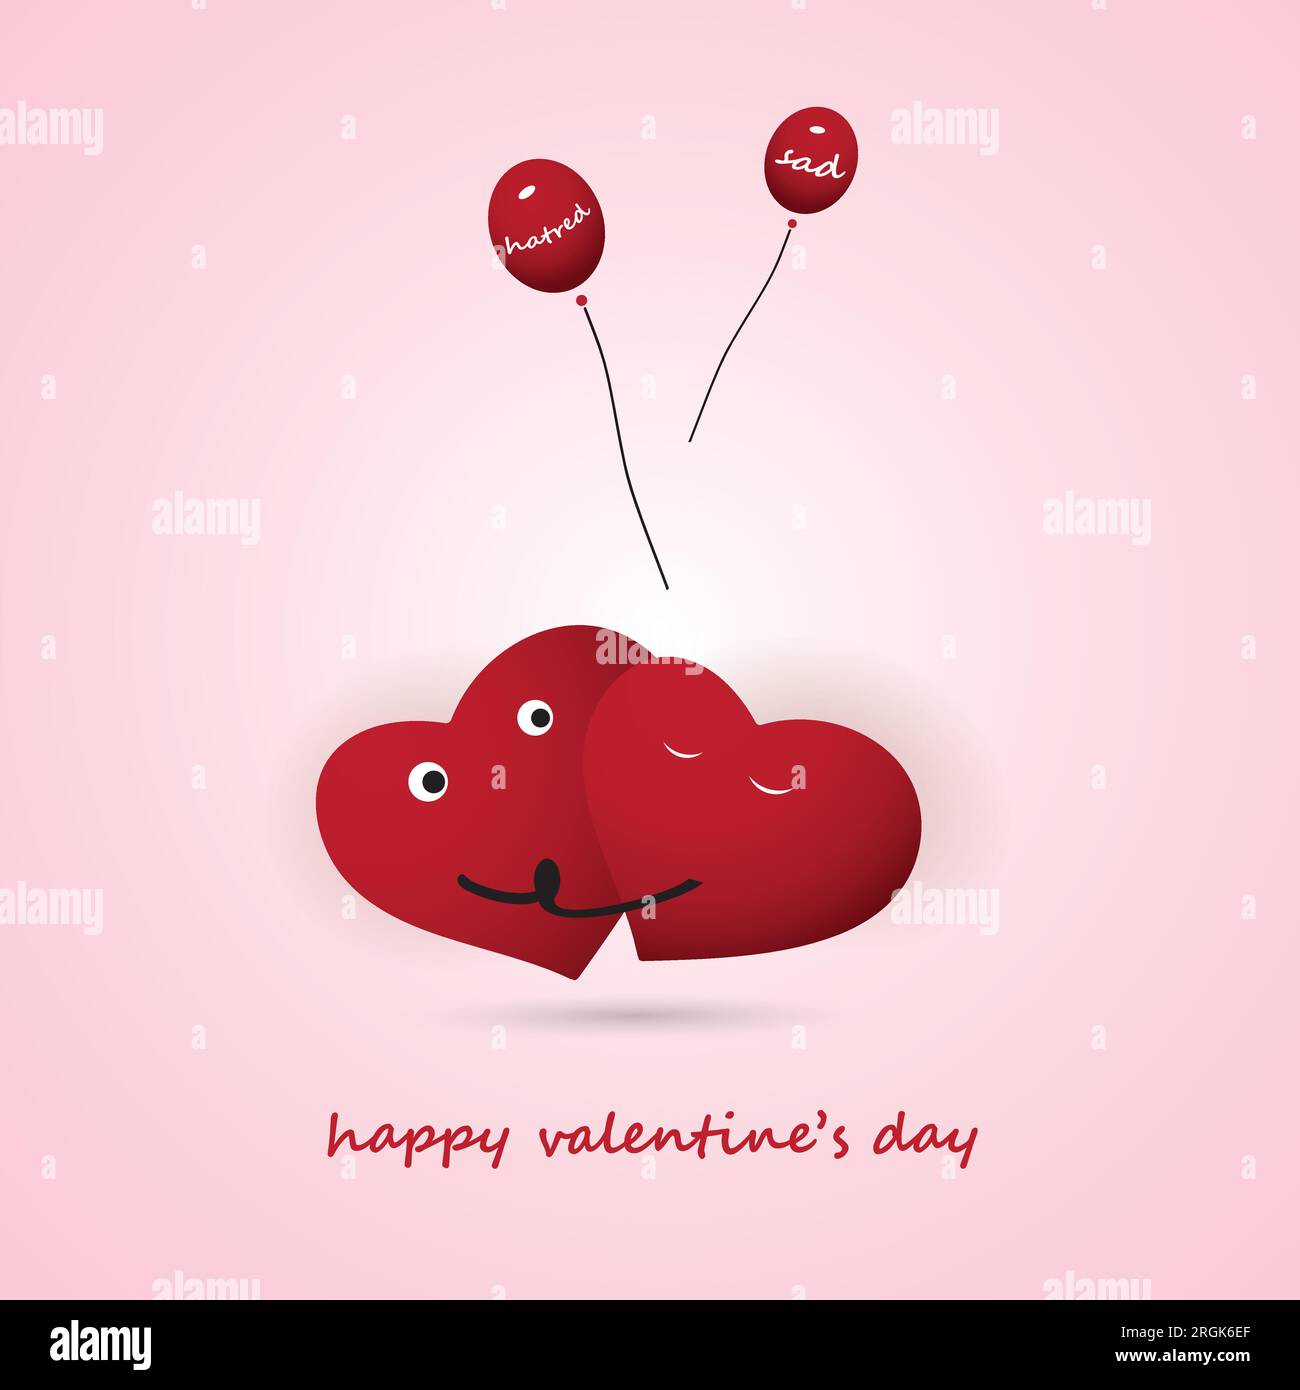 Valentines day aesthetic Stock Vector Images - Alamy